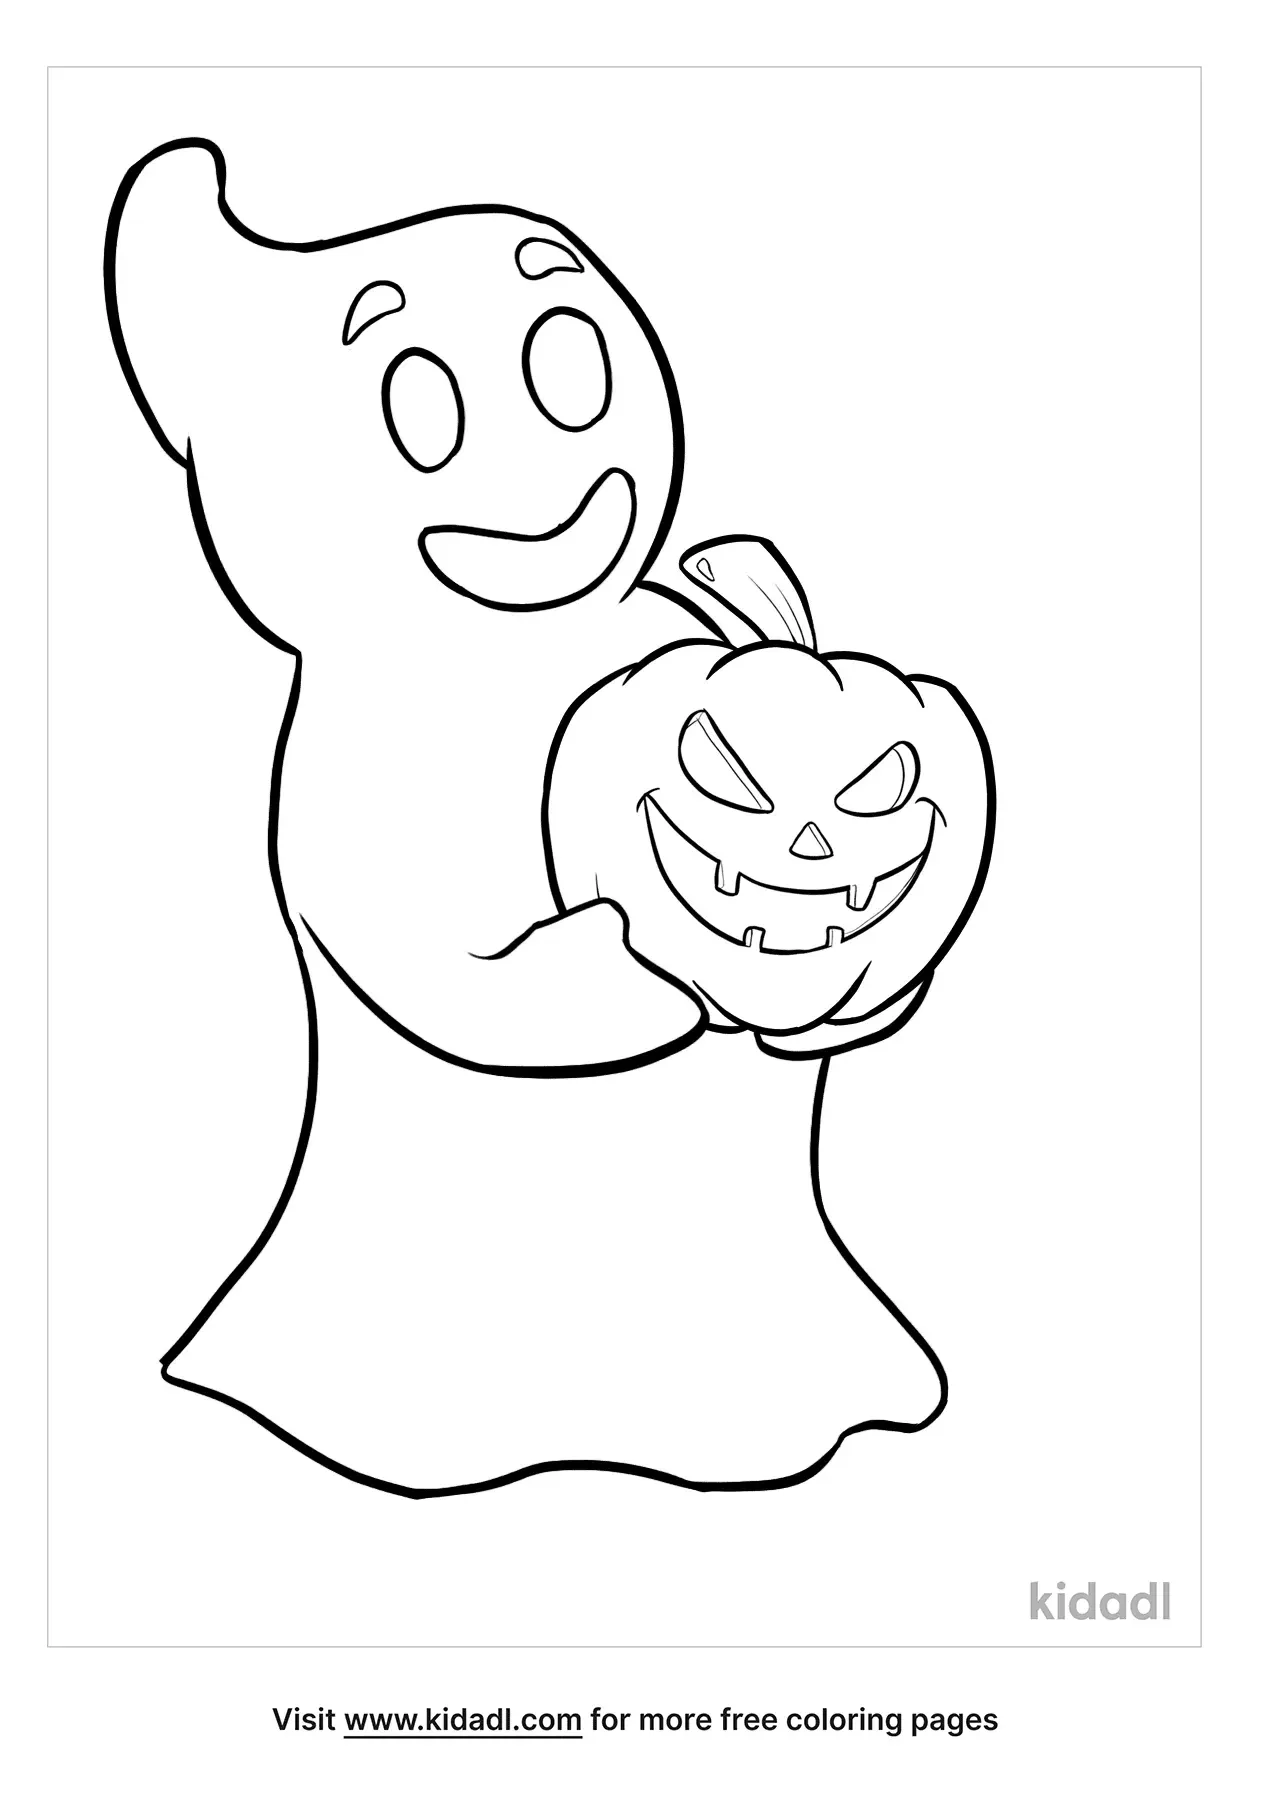 halloween-coloring-pages-10-free-spooky-printable-activities-for-kids